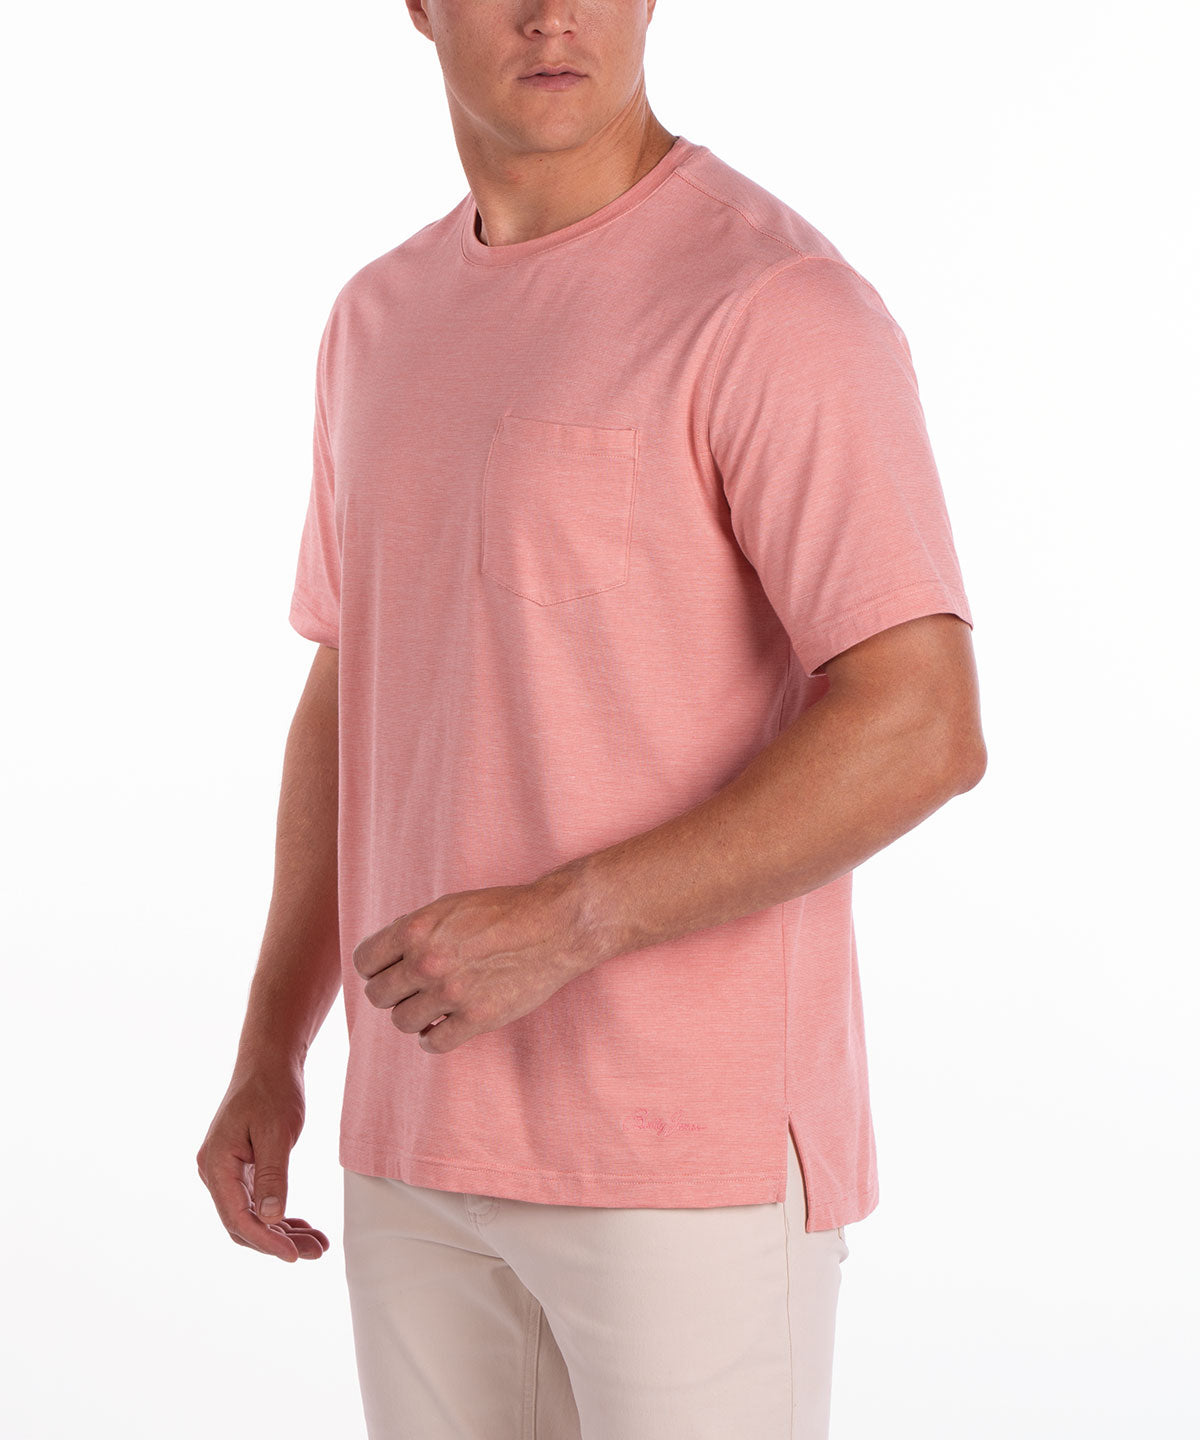 Pace Combed Cotton T-shirts Peach Blush